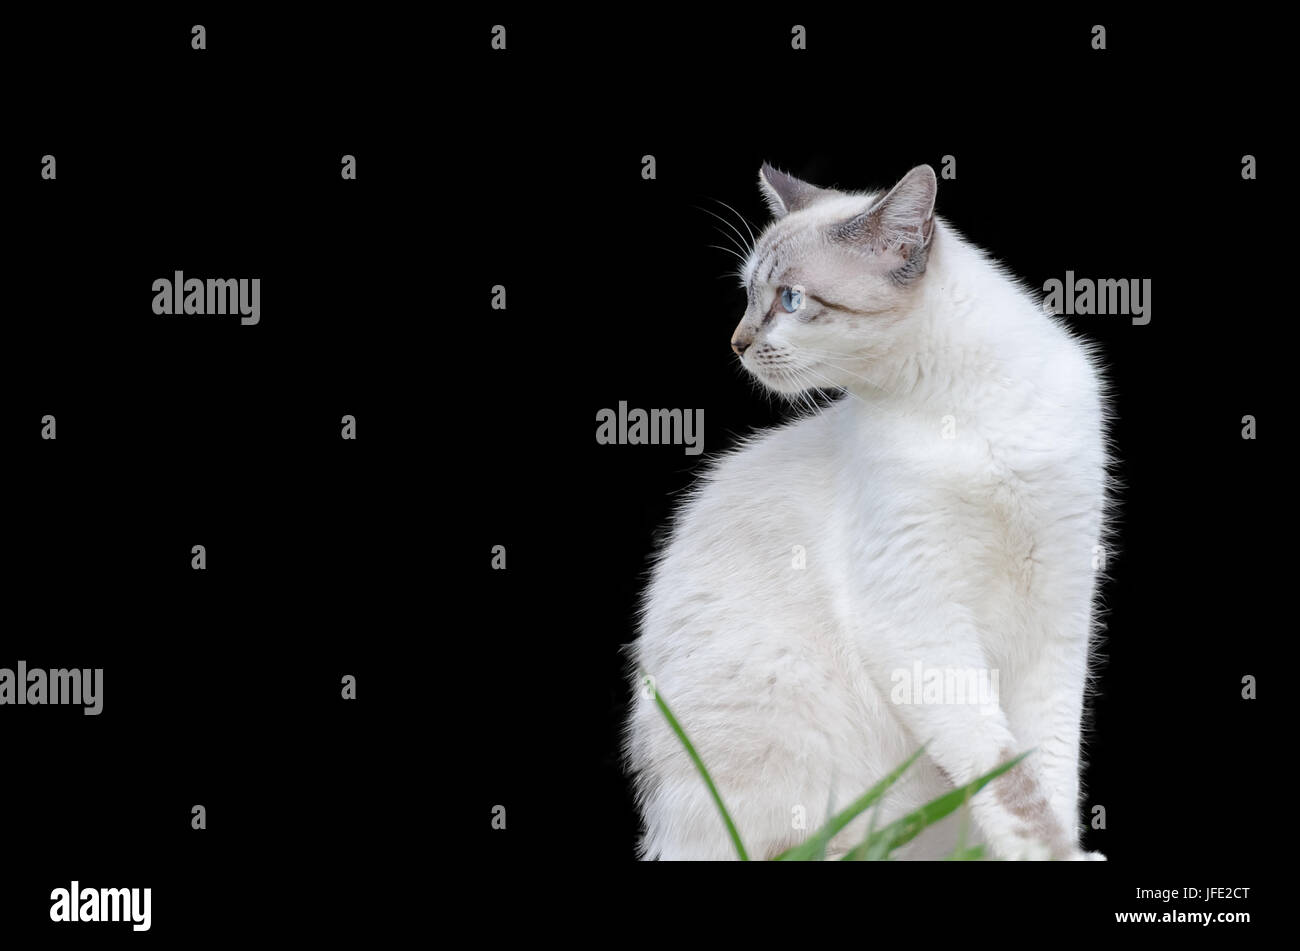 Cute cat with on black isolated background Stock Photo